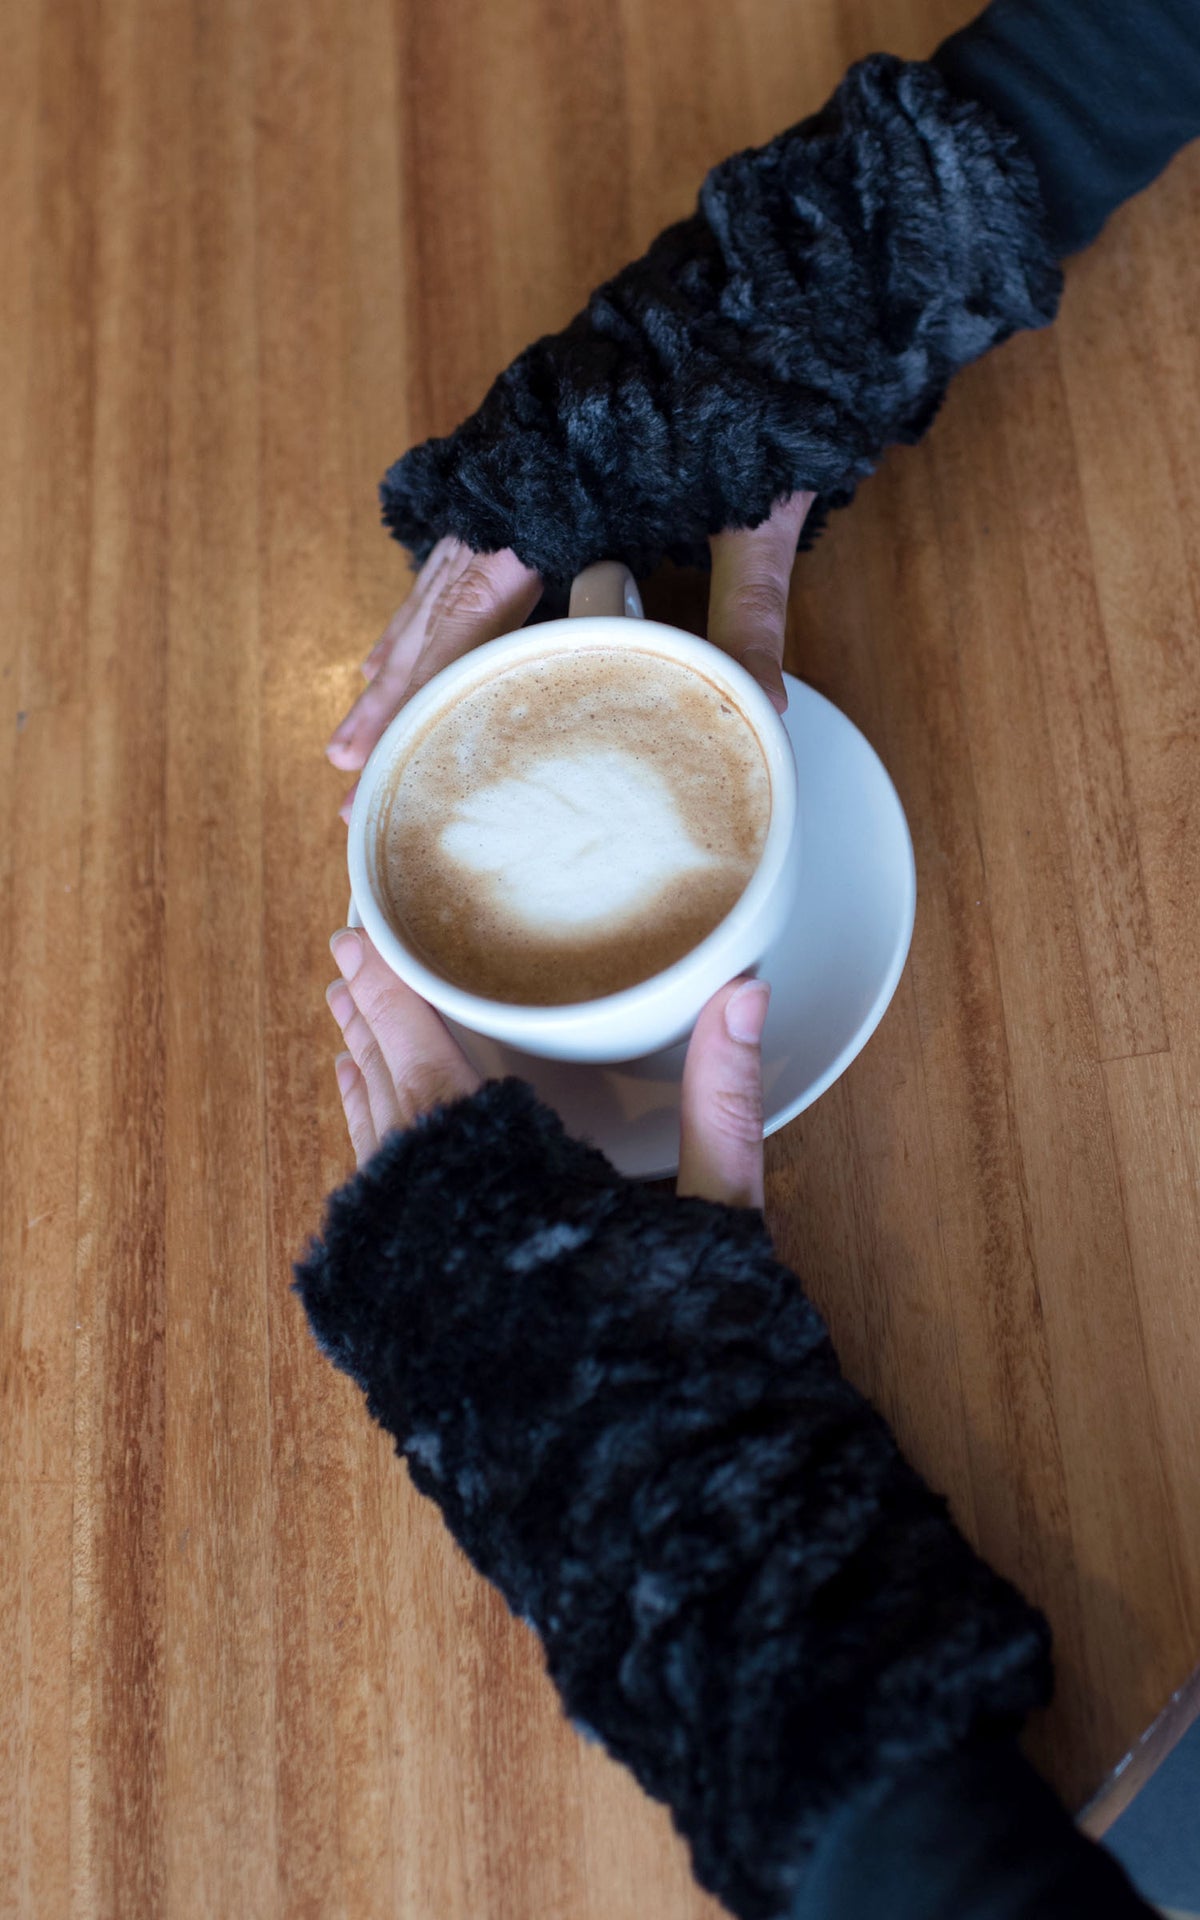 Fingerless Gloves  modleing holding a cup of  coffee| Cuddly Black Faux Fur | Handmade by Pandemonium Millinery Seattle, WA USA